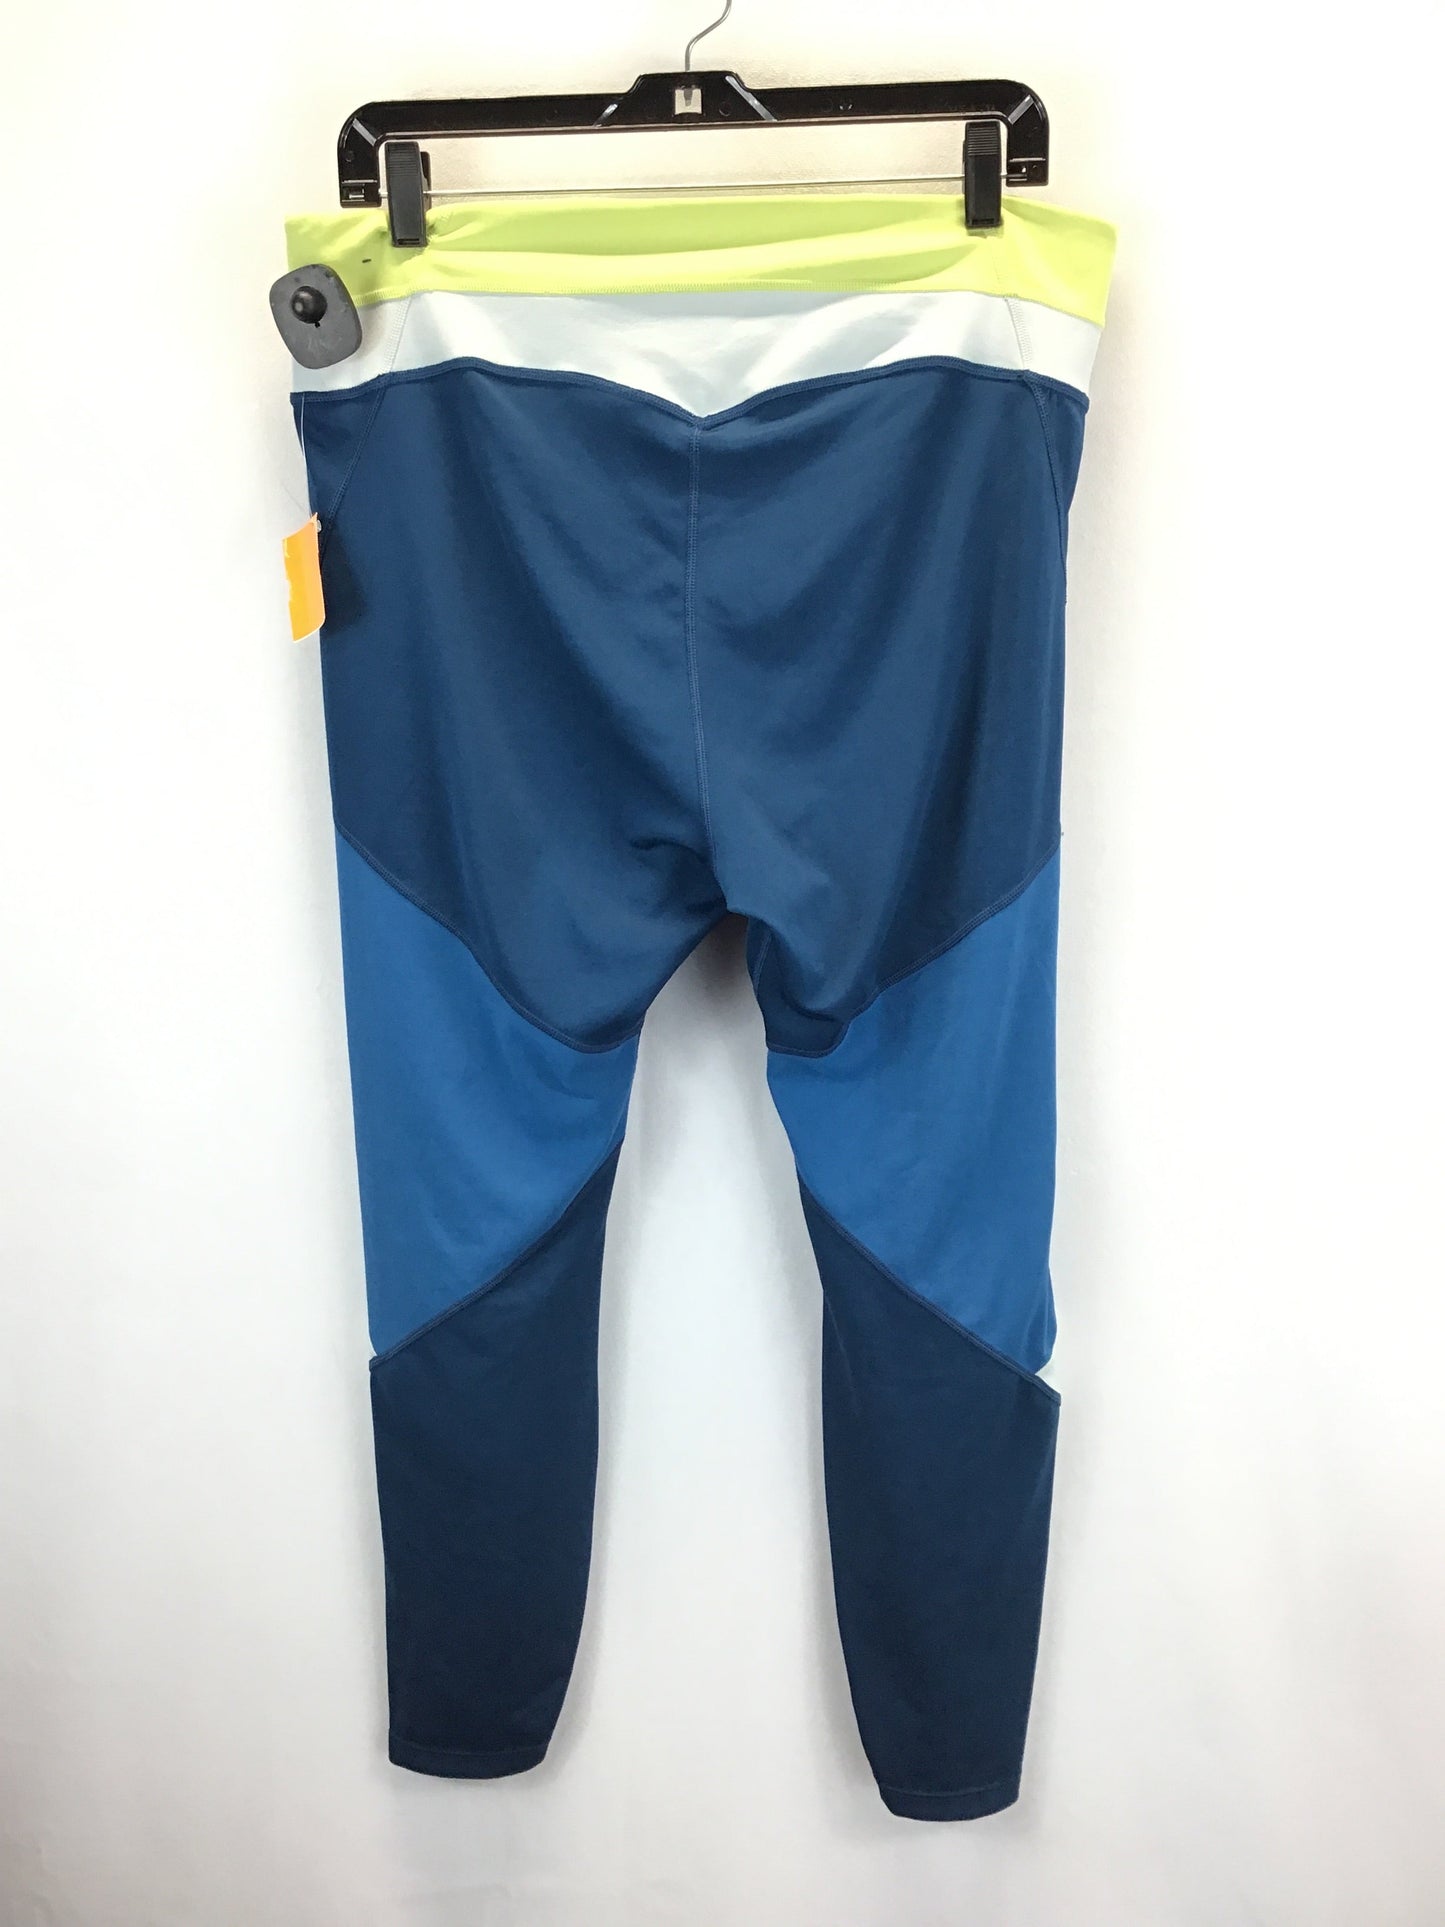 Blue & Yellow Athletic Pants Nike Apparel, Size 1x